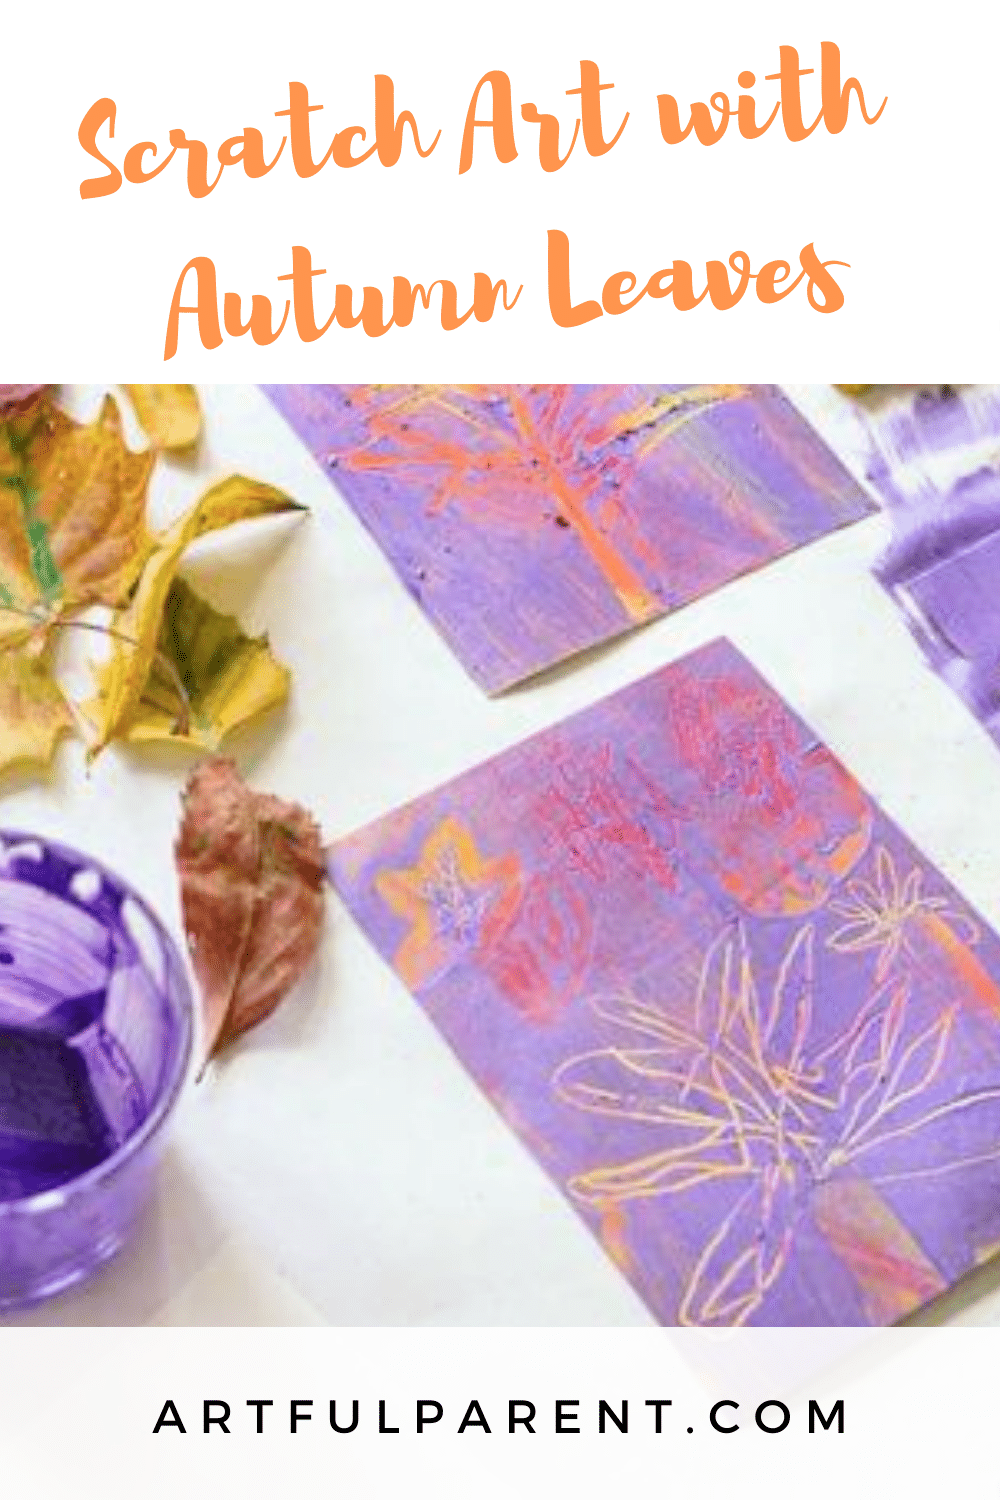 How to Make Scratch Art with Autumn Leaves for Kids